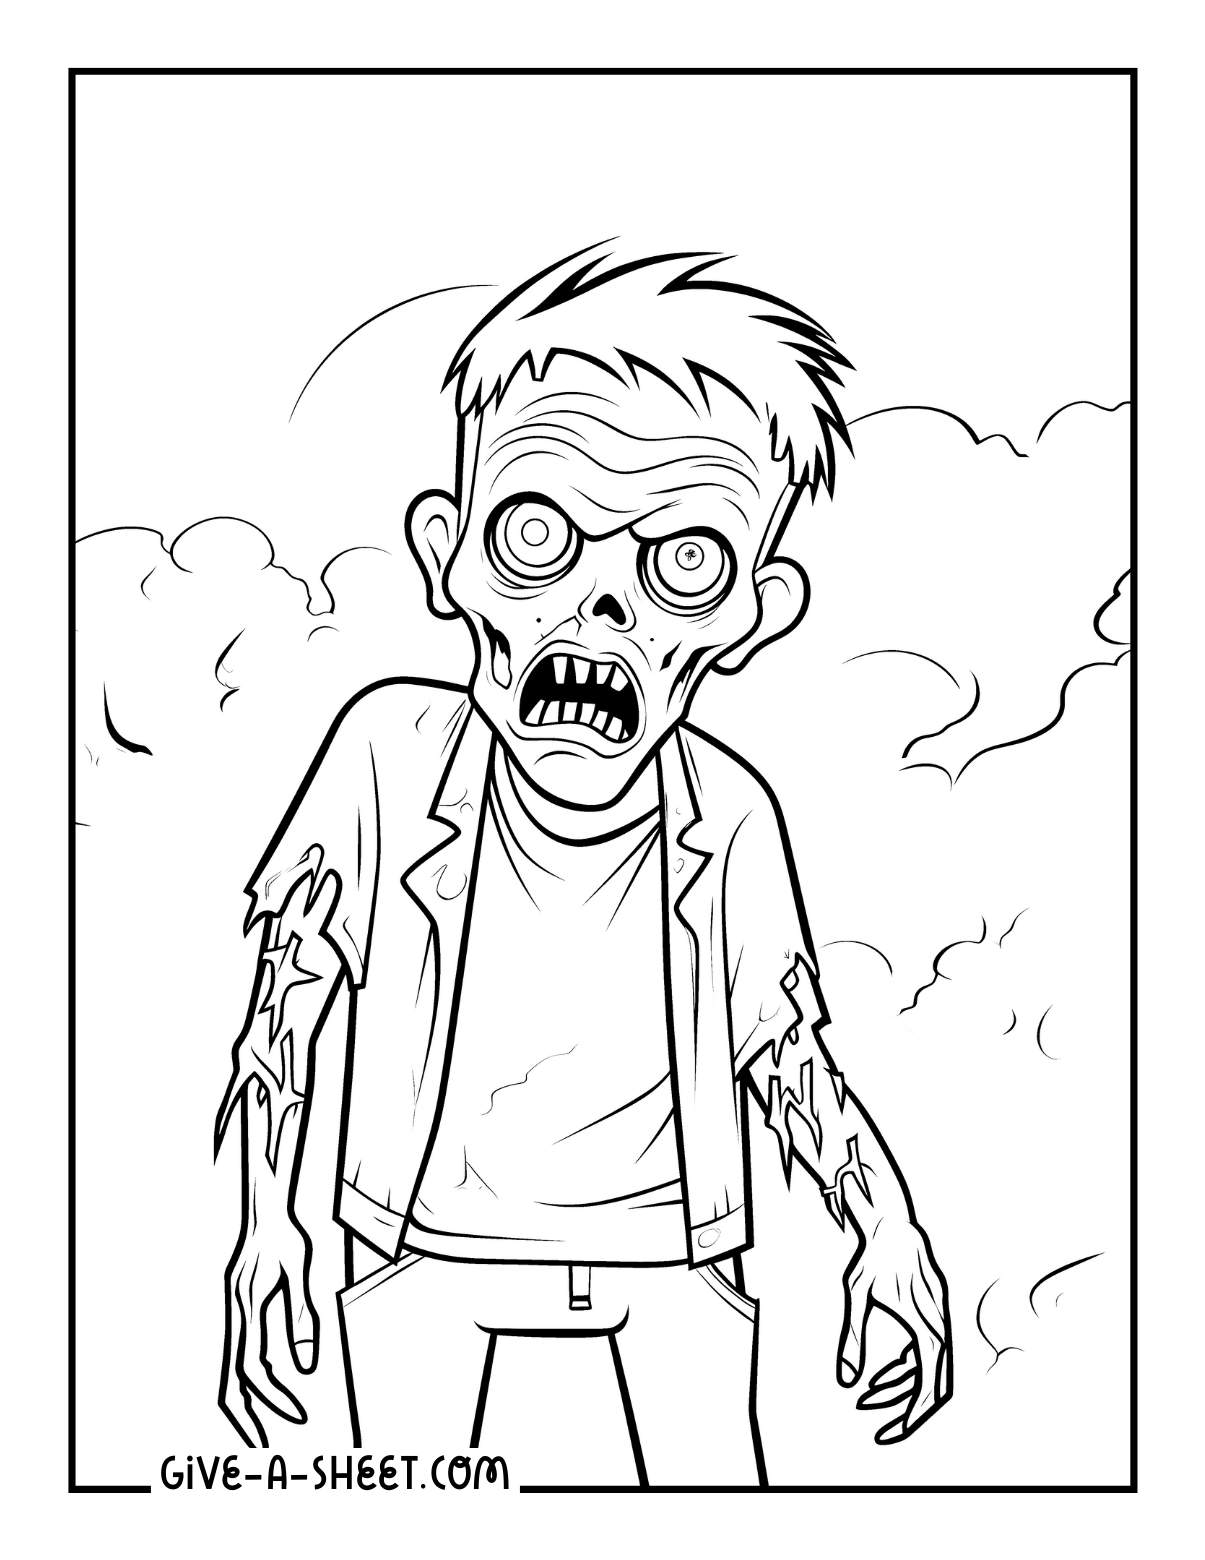 Walking dead zombie attacks coloring sheet for adults.